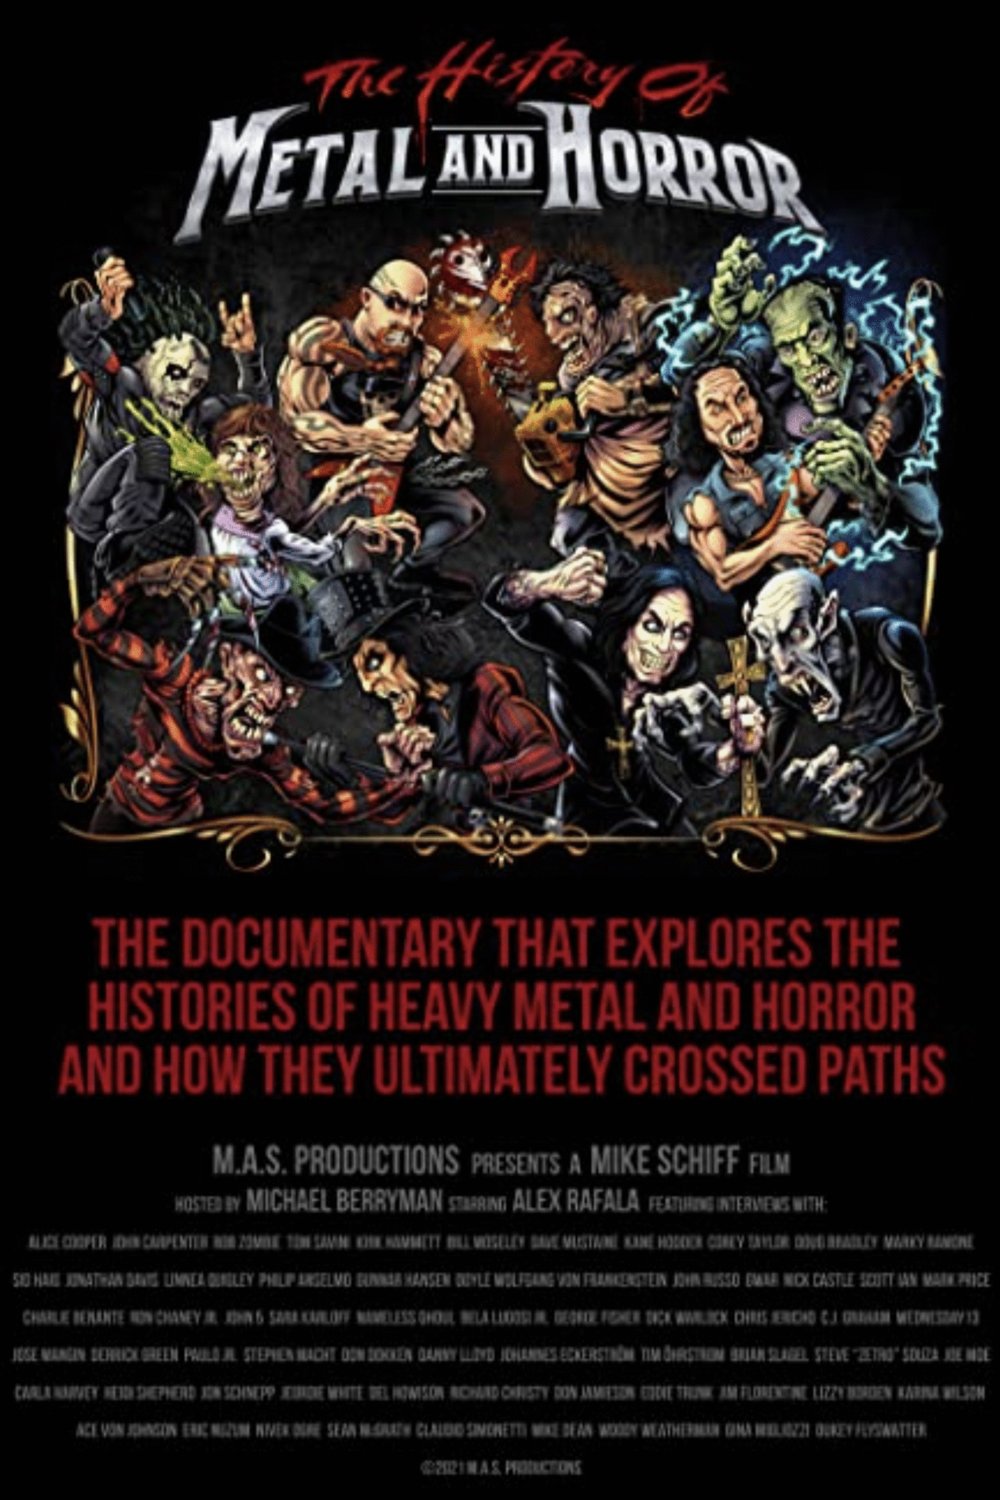 Poster of the movie The History of Metal and Horror